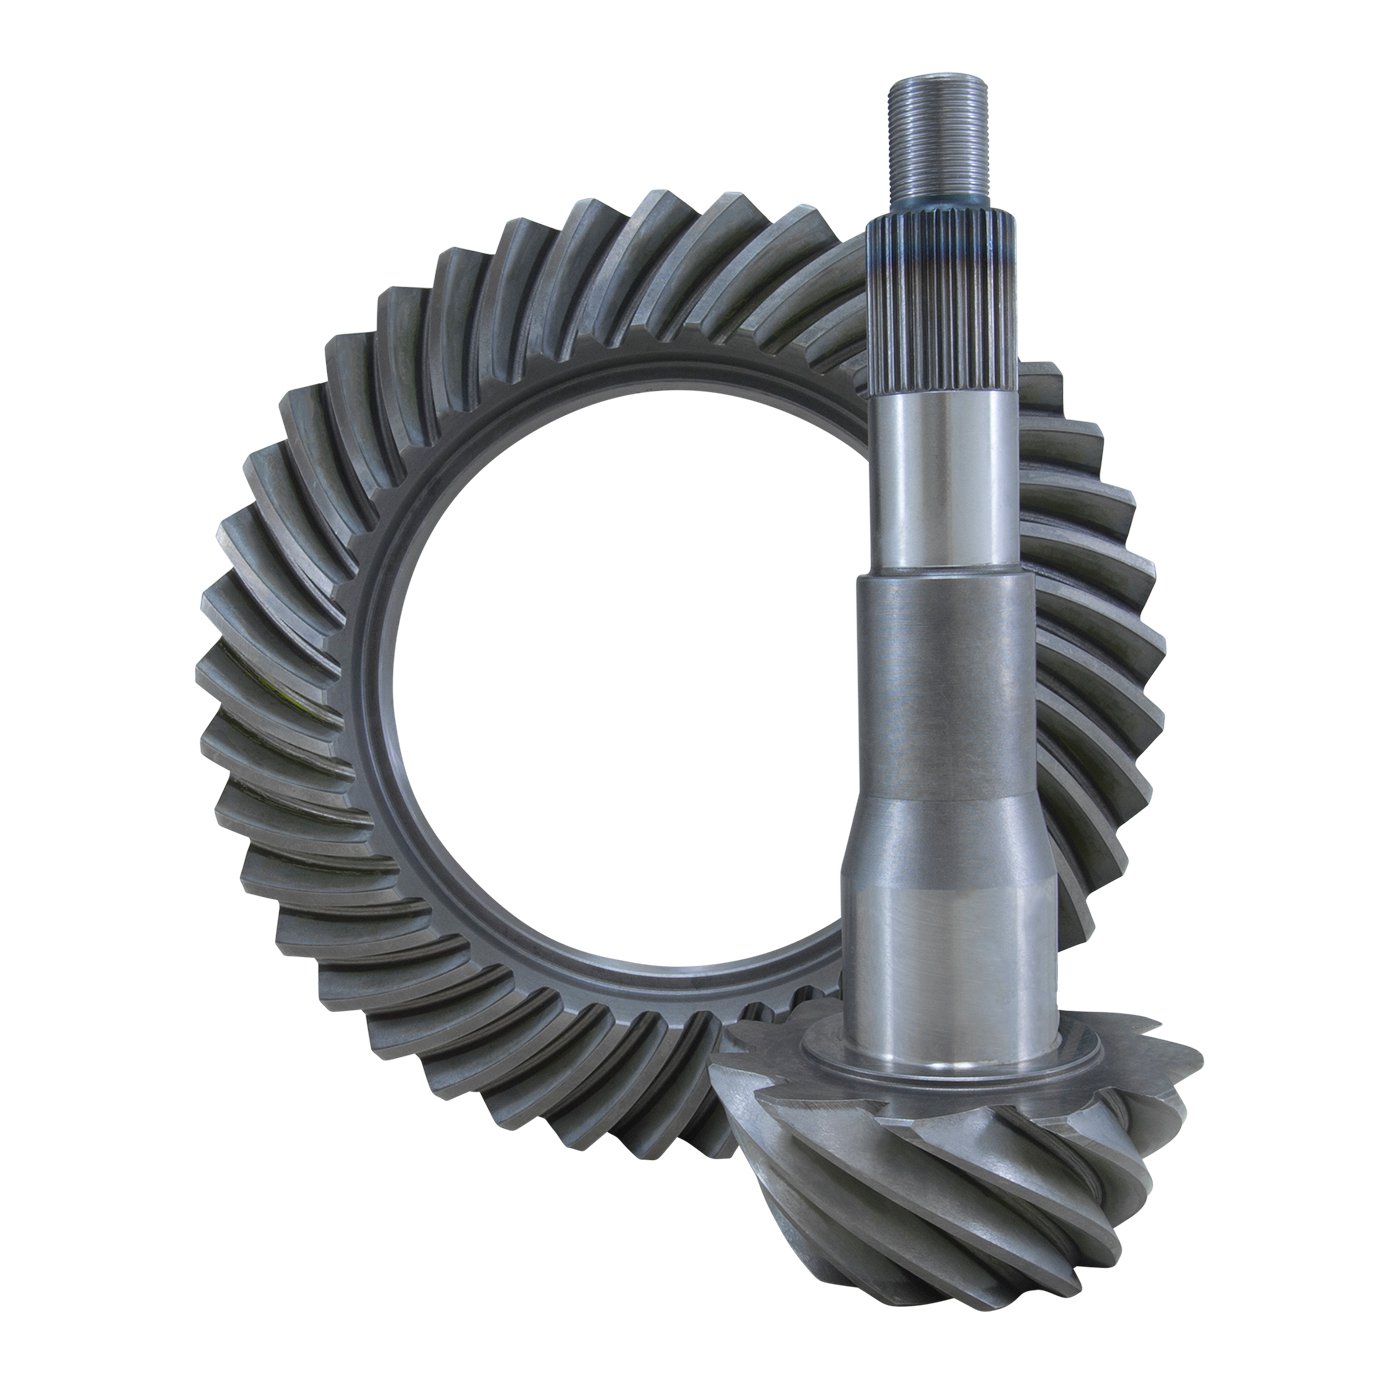 USA Standard 36112 Ring & Pinion Gear Set, For Ford 10.25 in., 5.38 Ratio